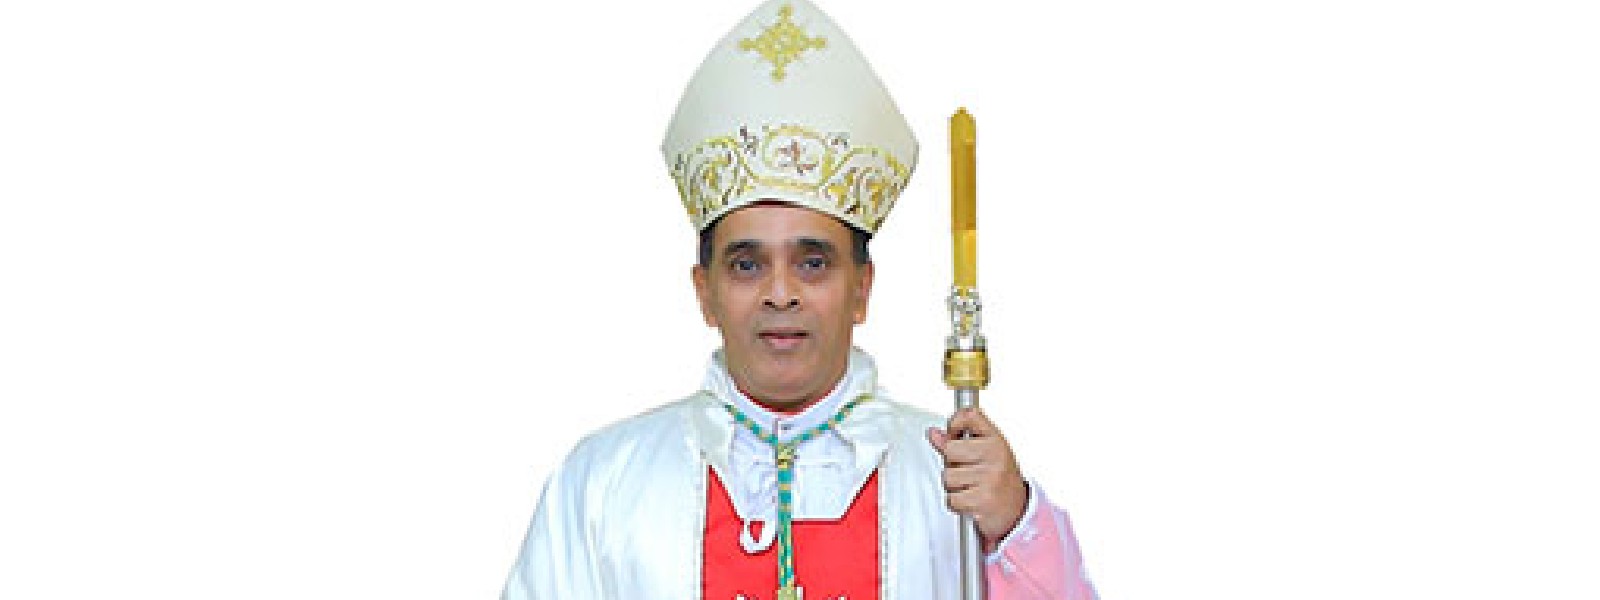 His Lordship Bishop Valence Mendis is the new Bishop of Kandy